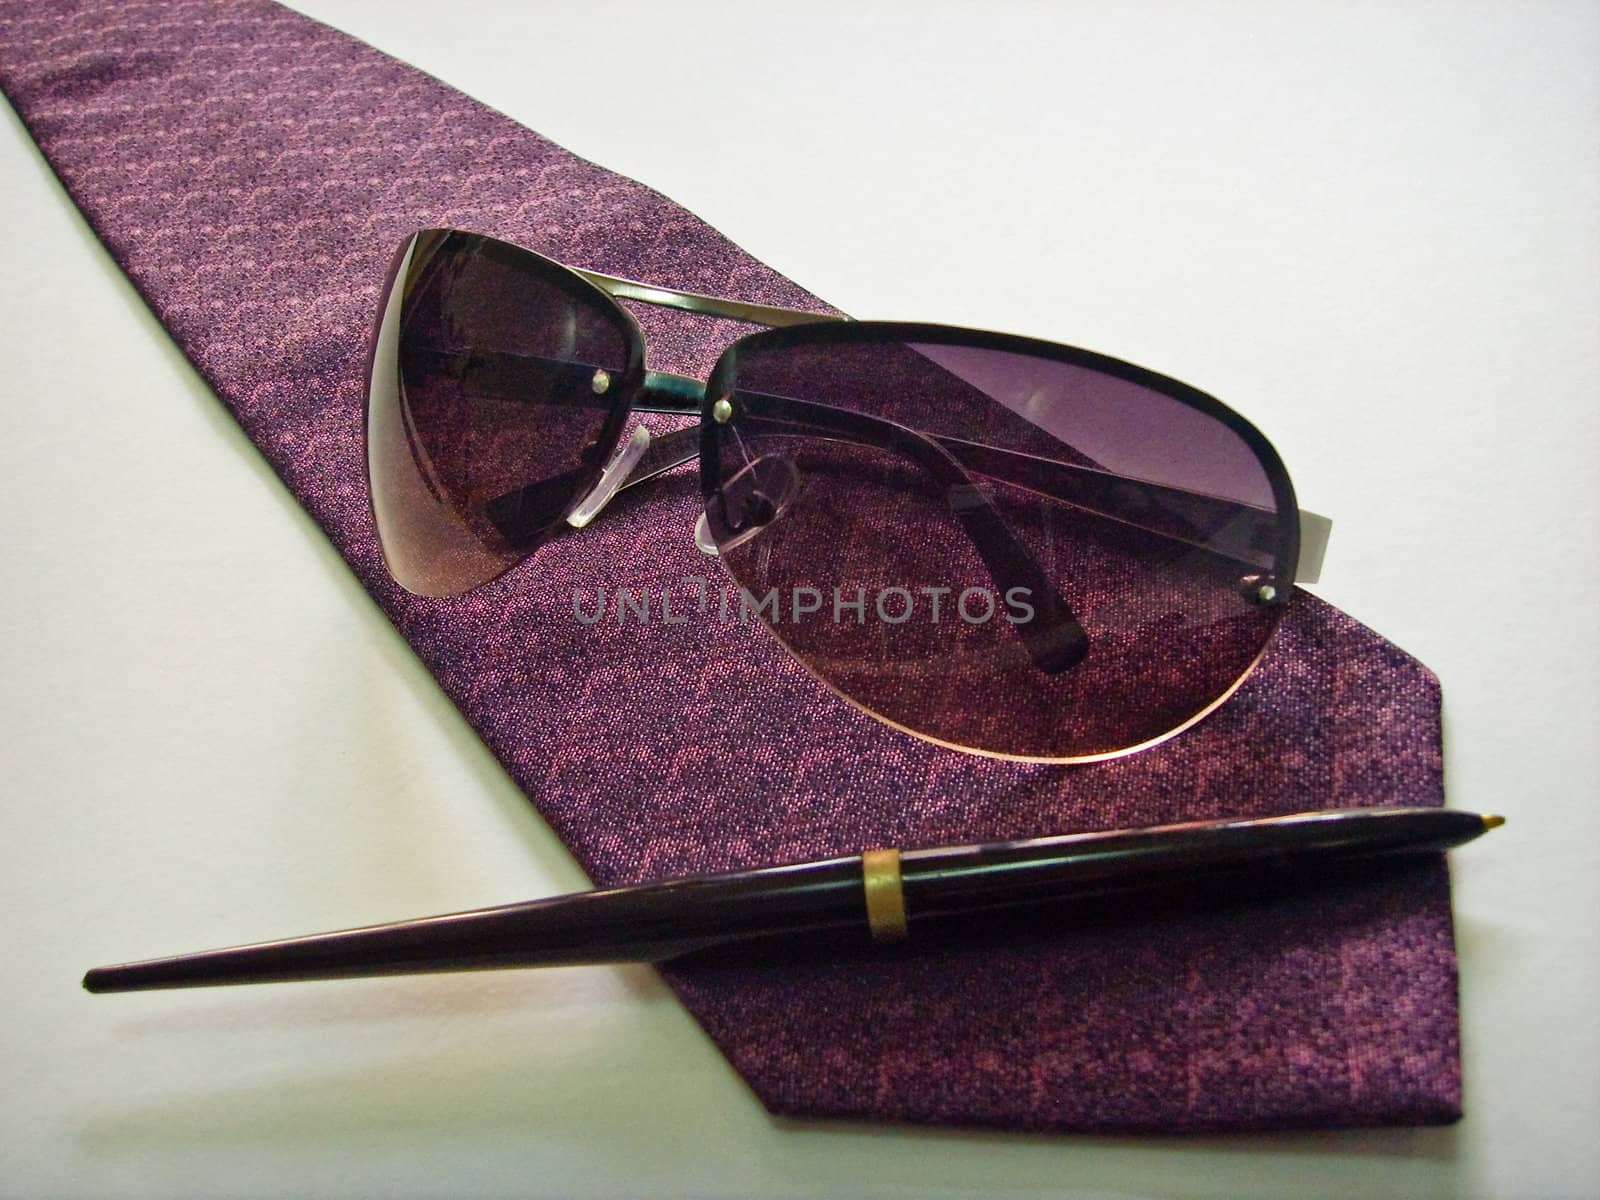 Sunglasses, pen and a purple tie on a white background